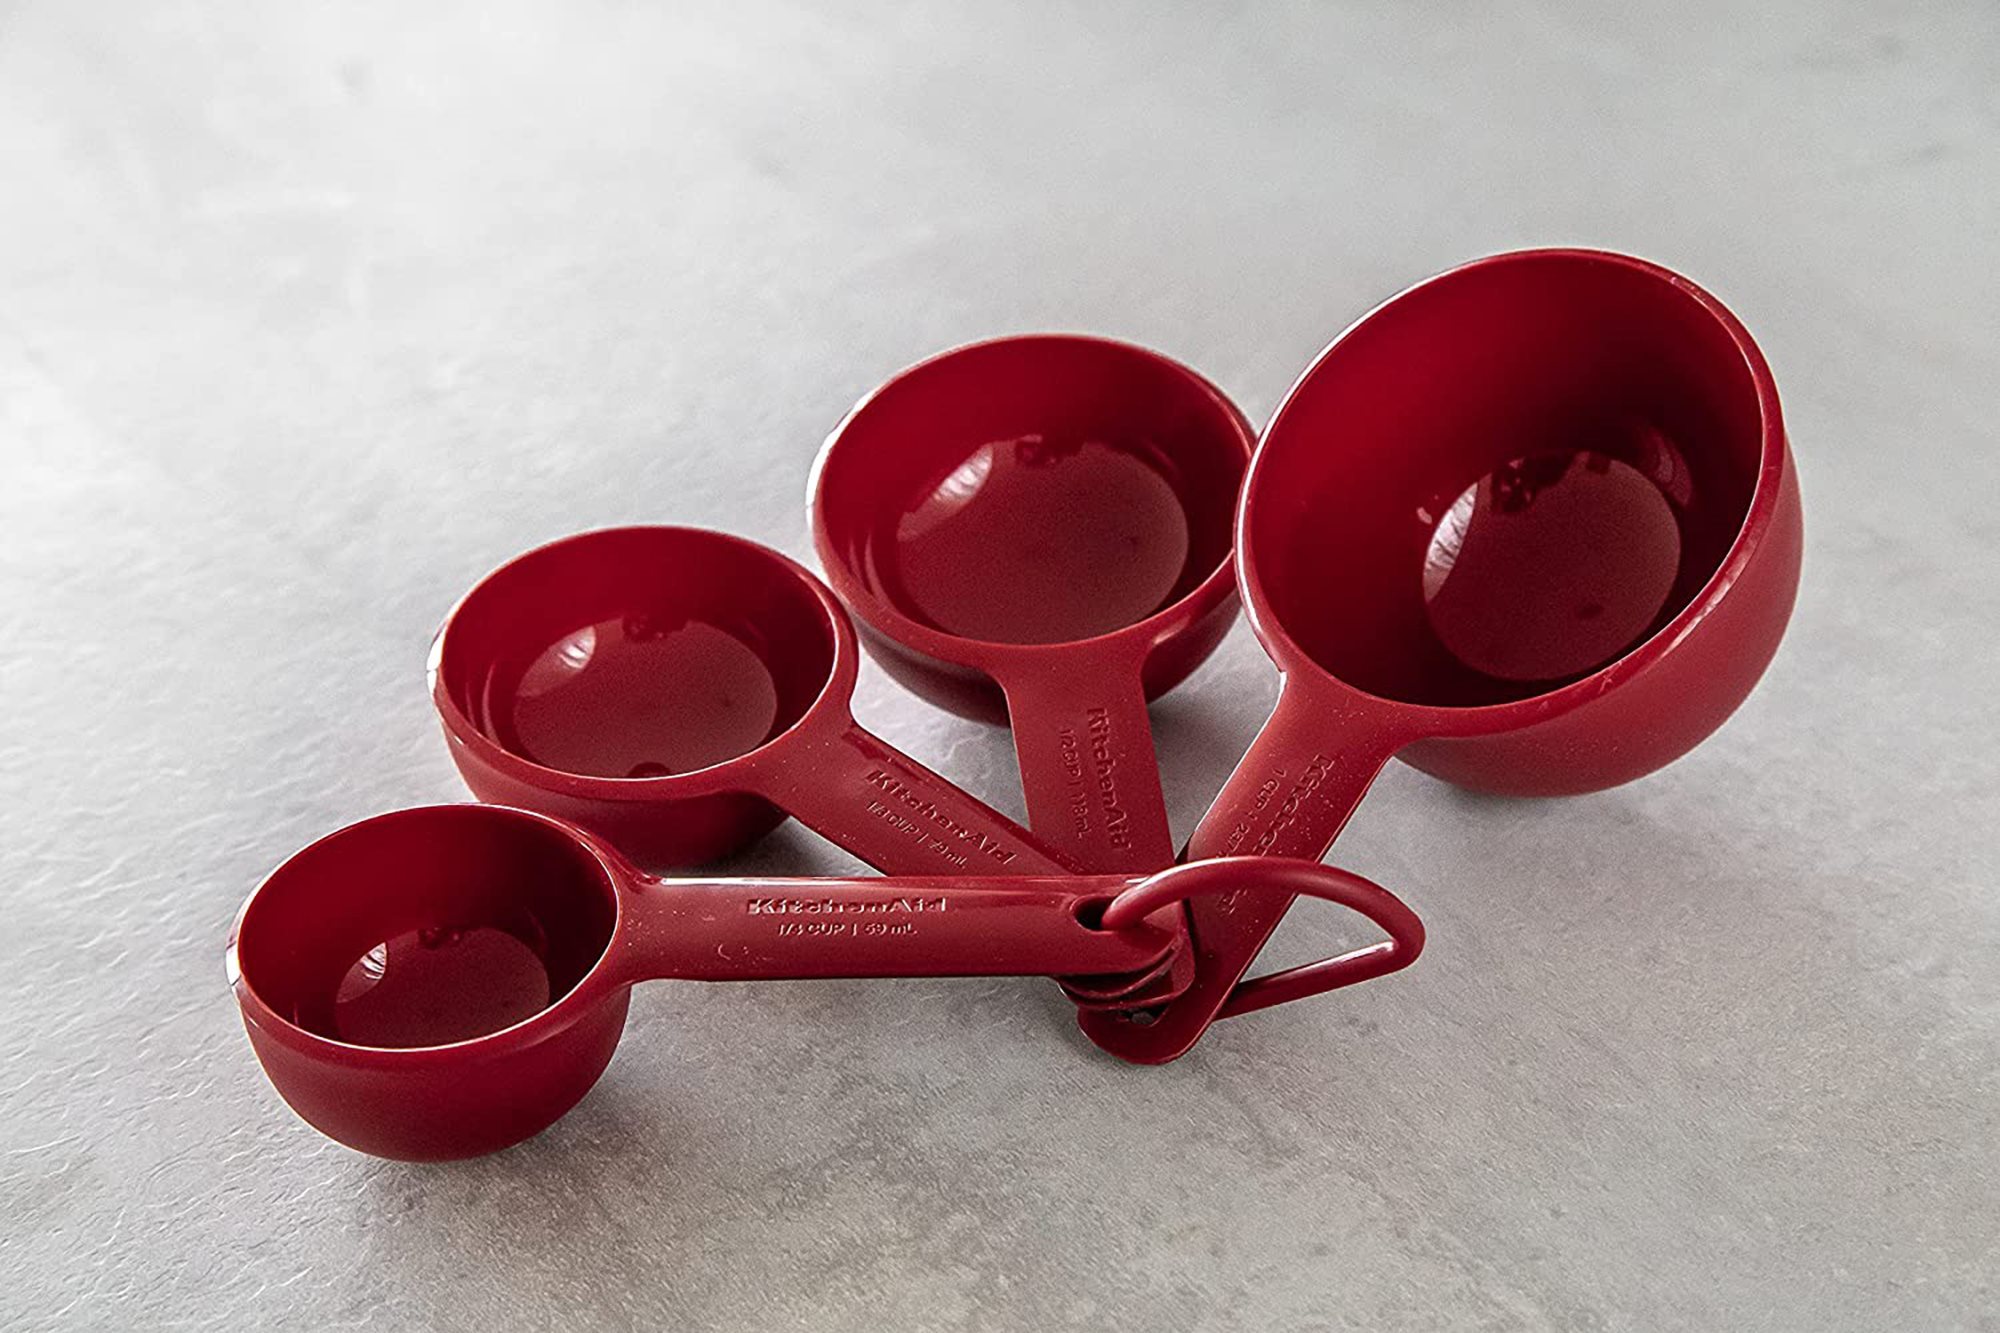 Red Measuring Cups, Set of 4